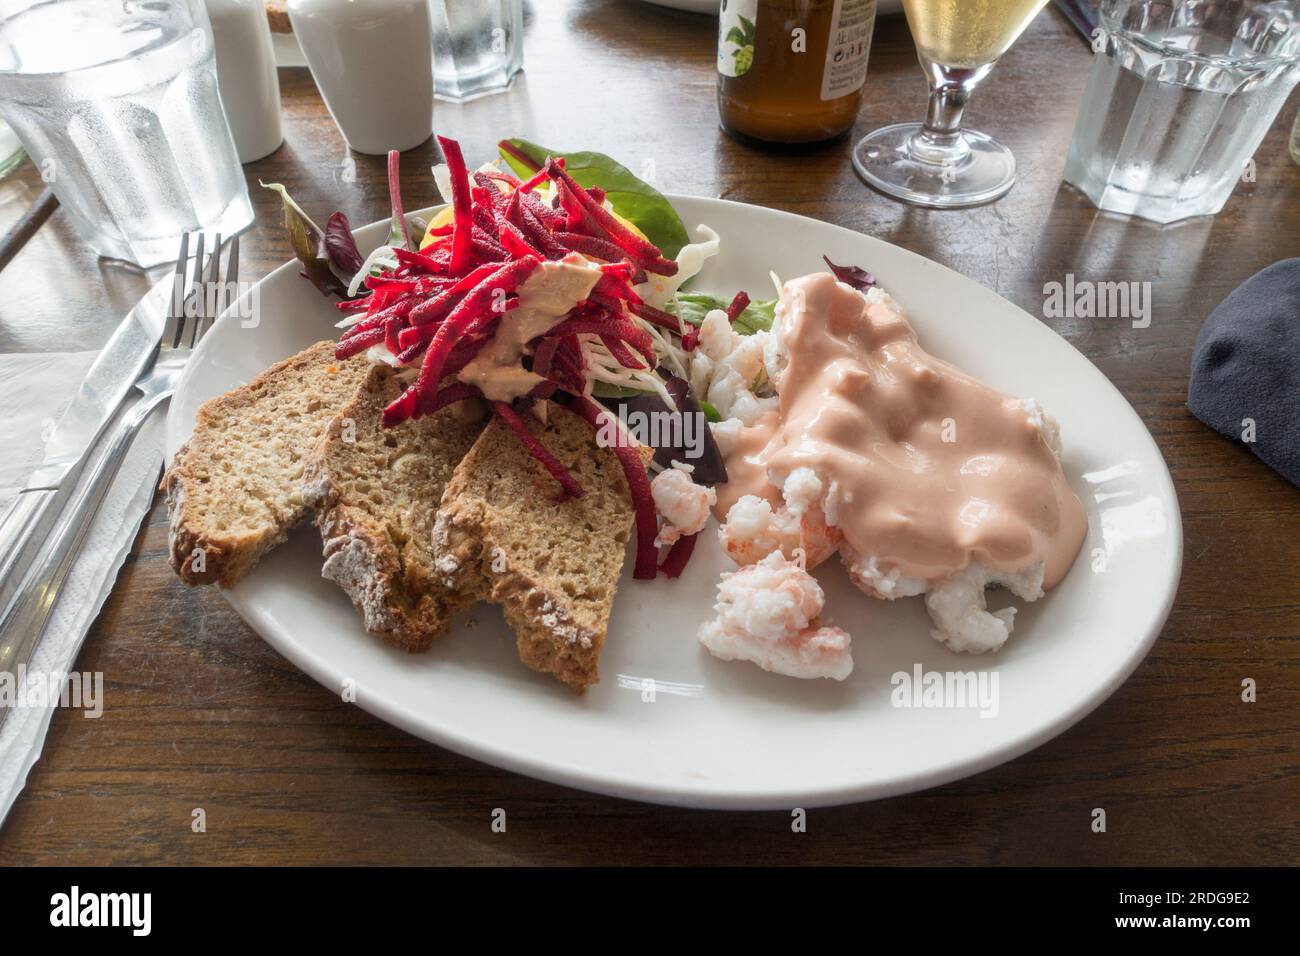 Open sandwich plate of prawns, brown bread, marie rose sauce and salad in an Irish seaside gastro pub restaurant Stock Photo